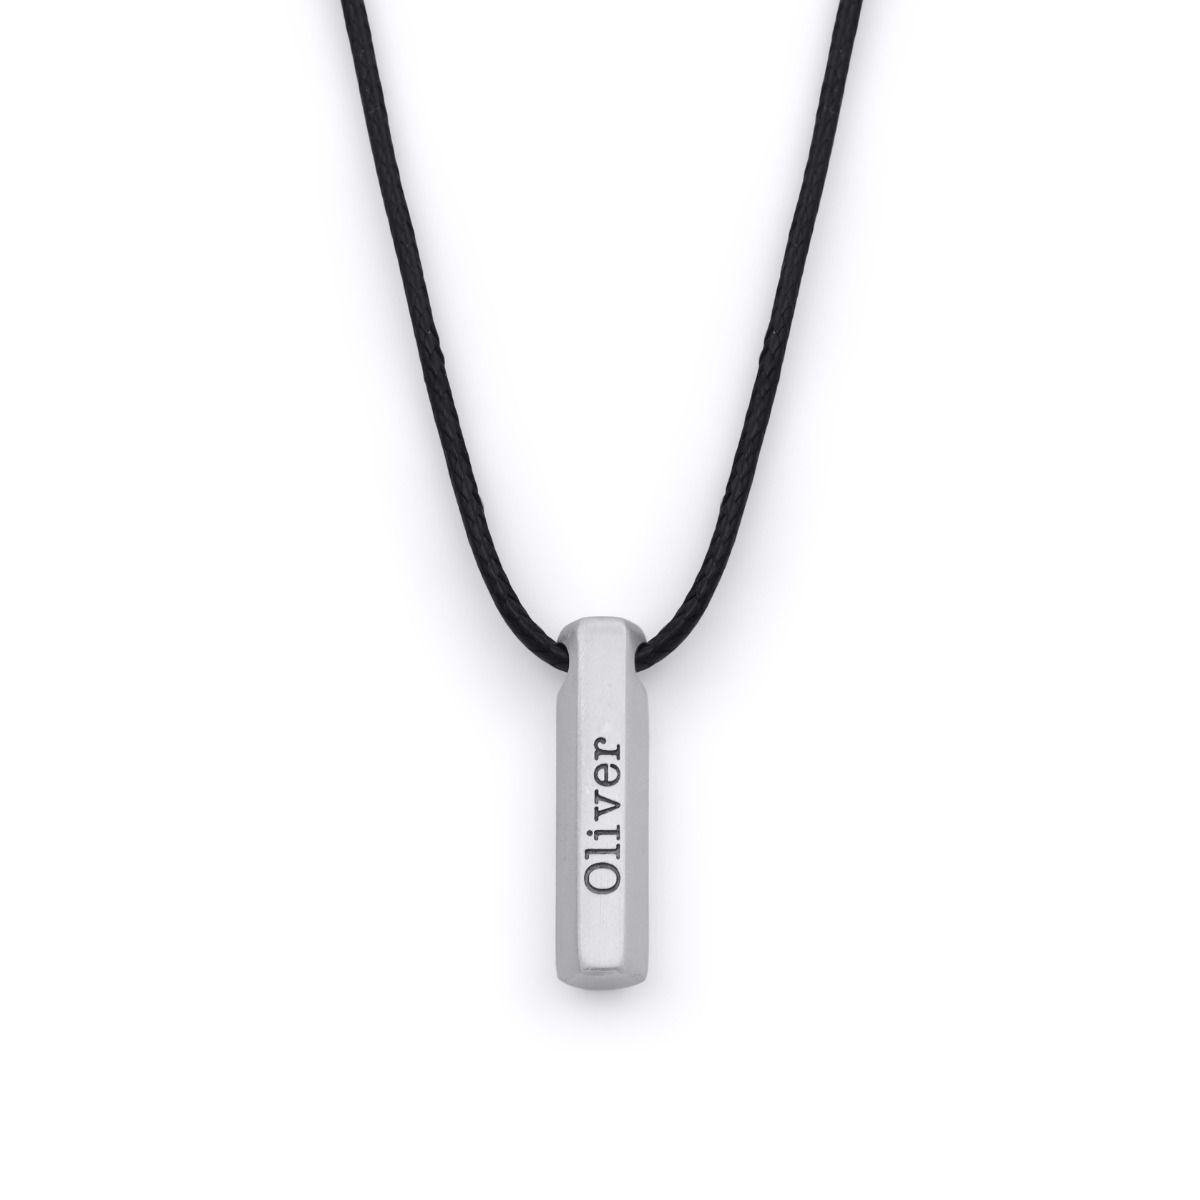 Hexa Bar Name Necklace for Men - Sterling Silver / Black Cord